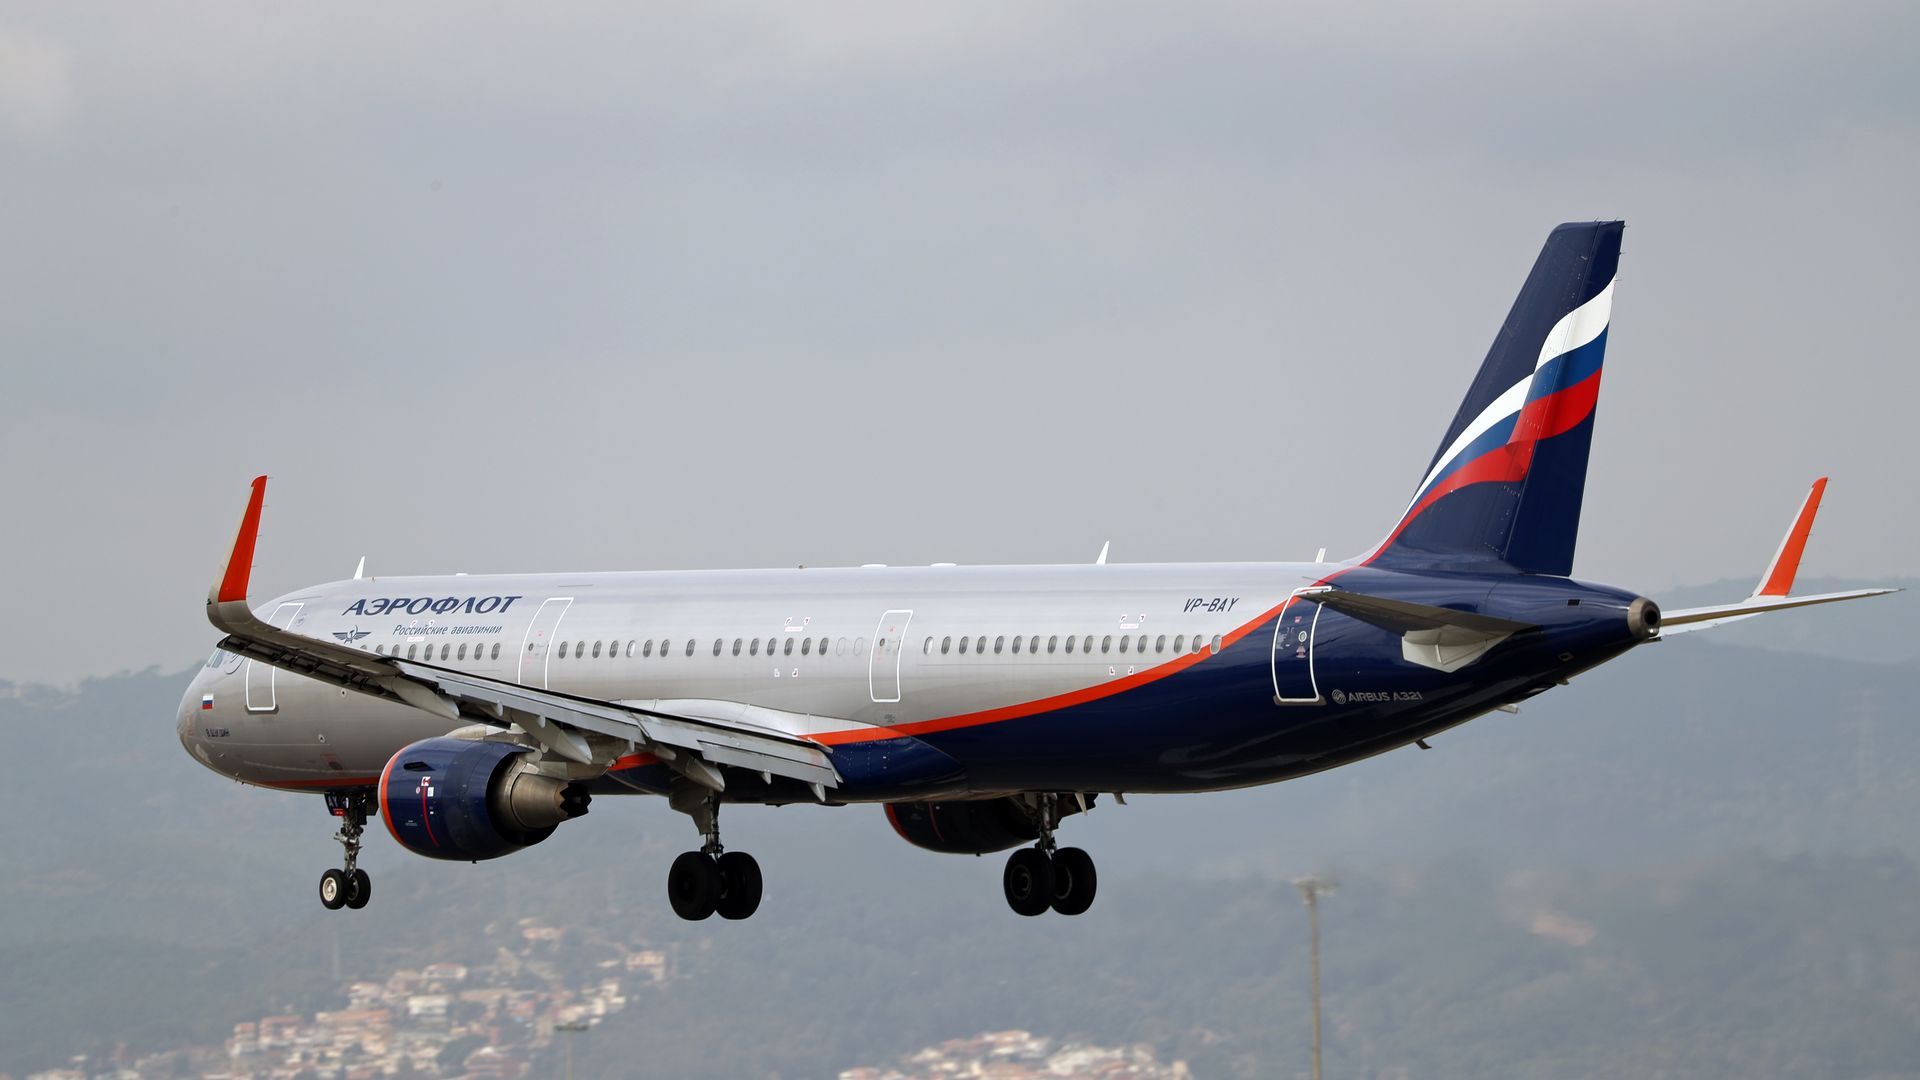 Airbus A321, from russian Aeroflot company, getting ready to land at Barcelona airport, in Barcelona on 25th february 2022.